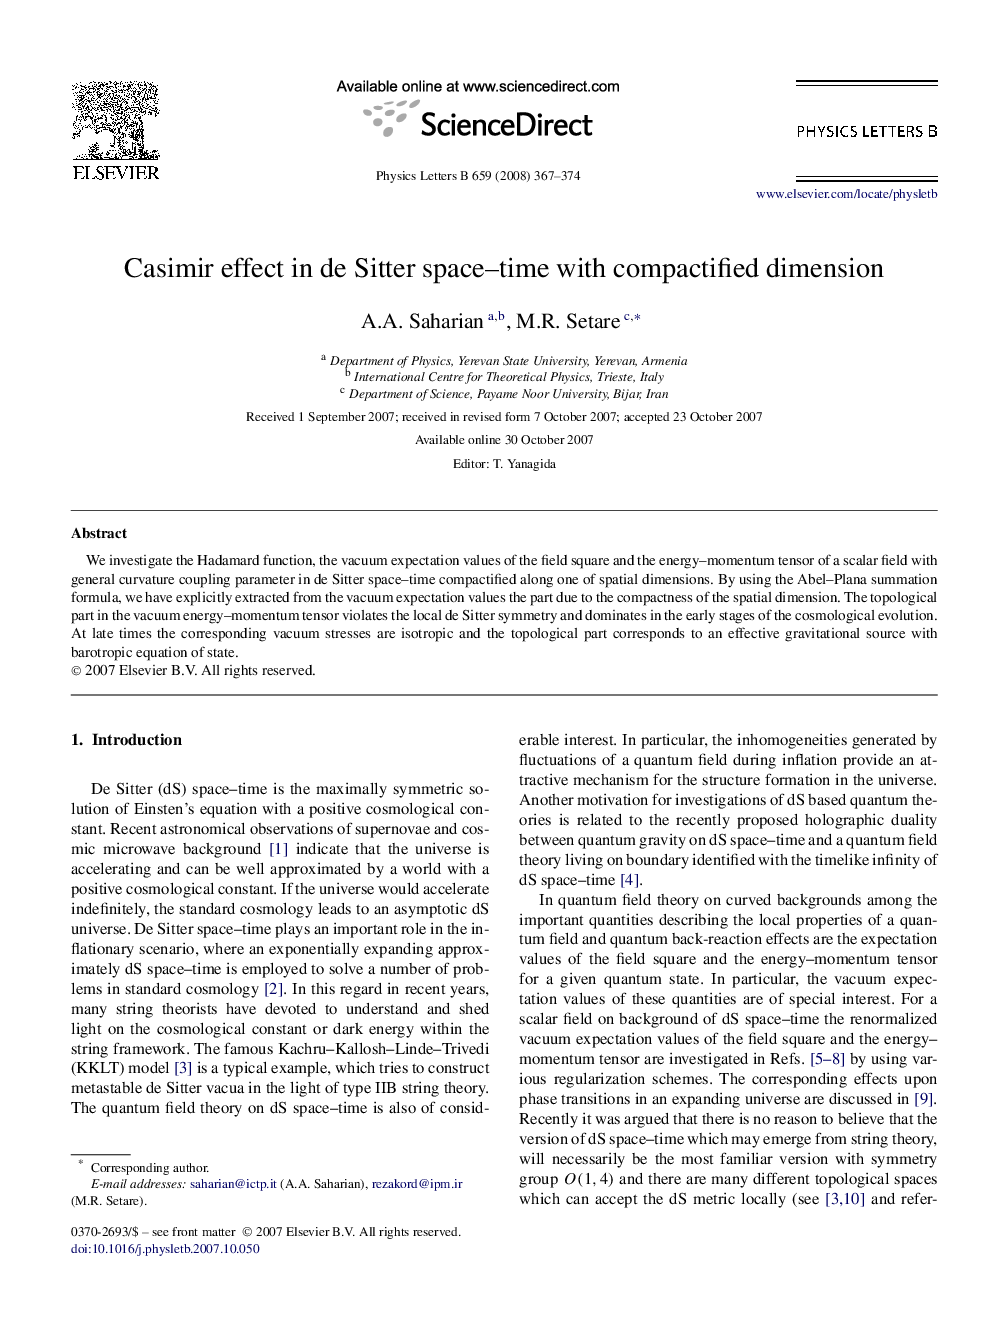 Casimir effect in de Sitter space-time with compactified dimension